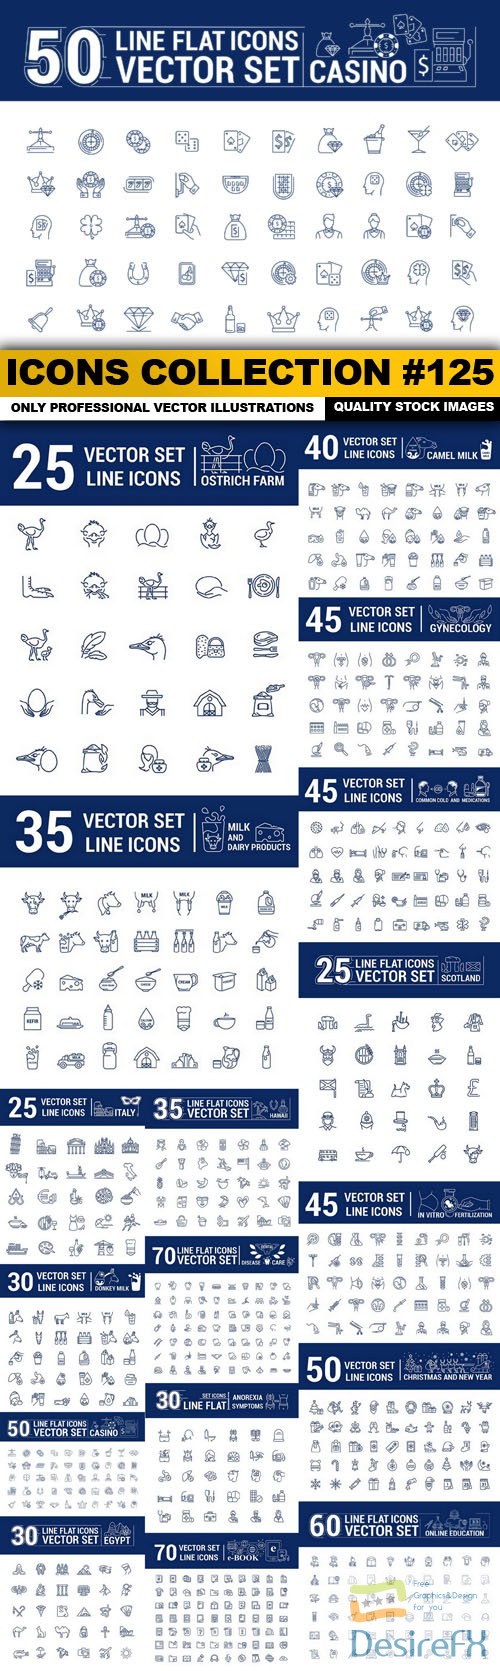 Icons Collection #125 - 17 Vector